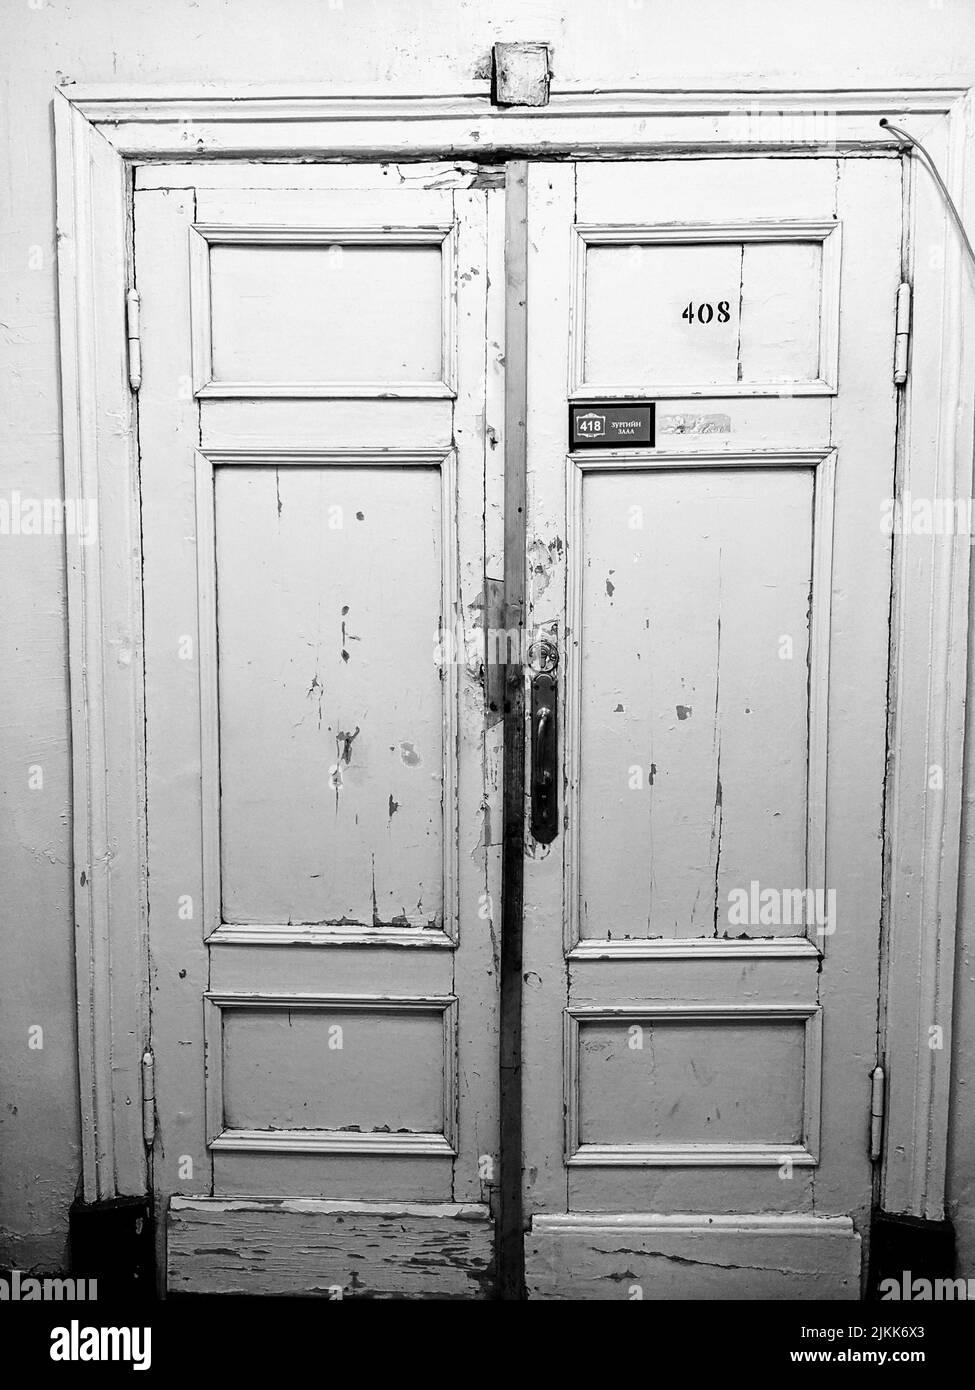 A vertical black and white shot of an old door with number '408' written on it Stock Photo